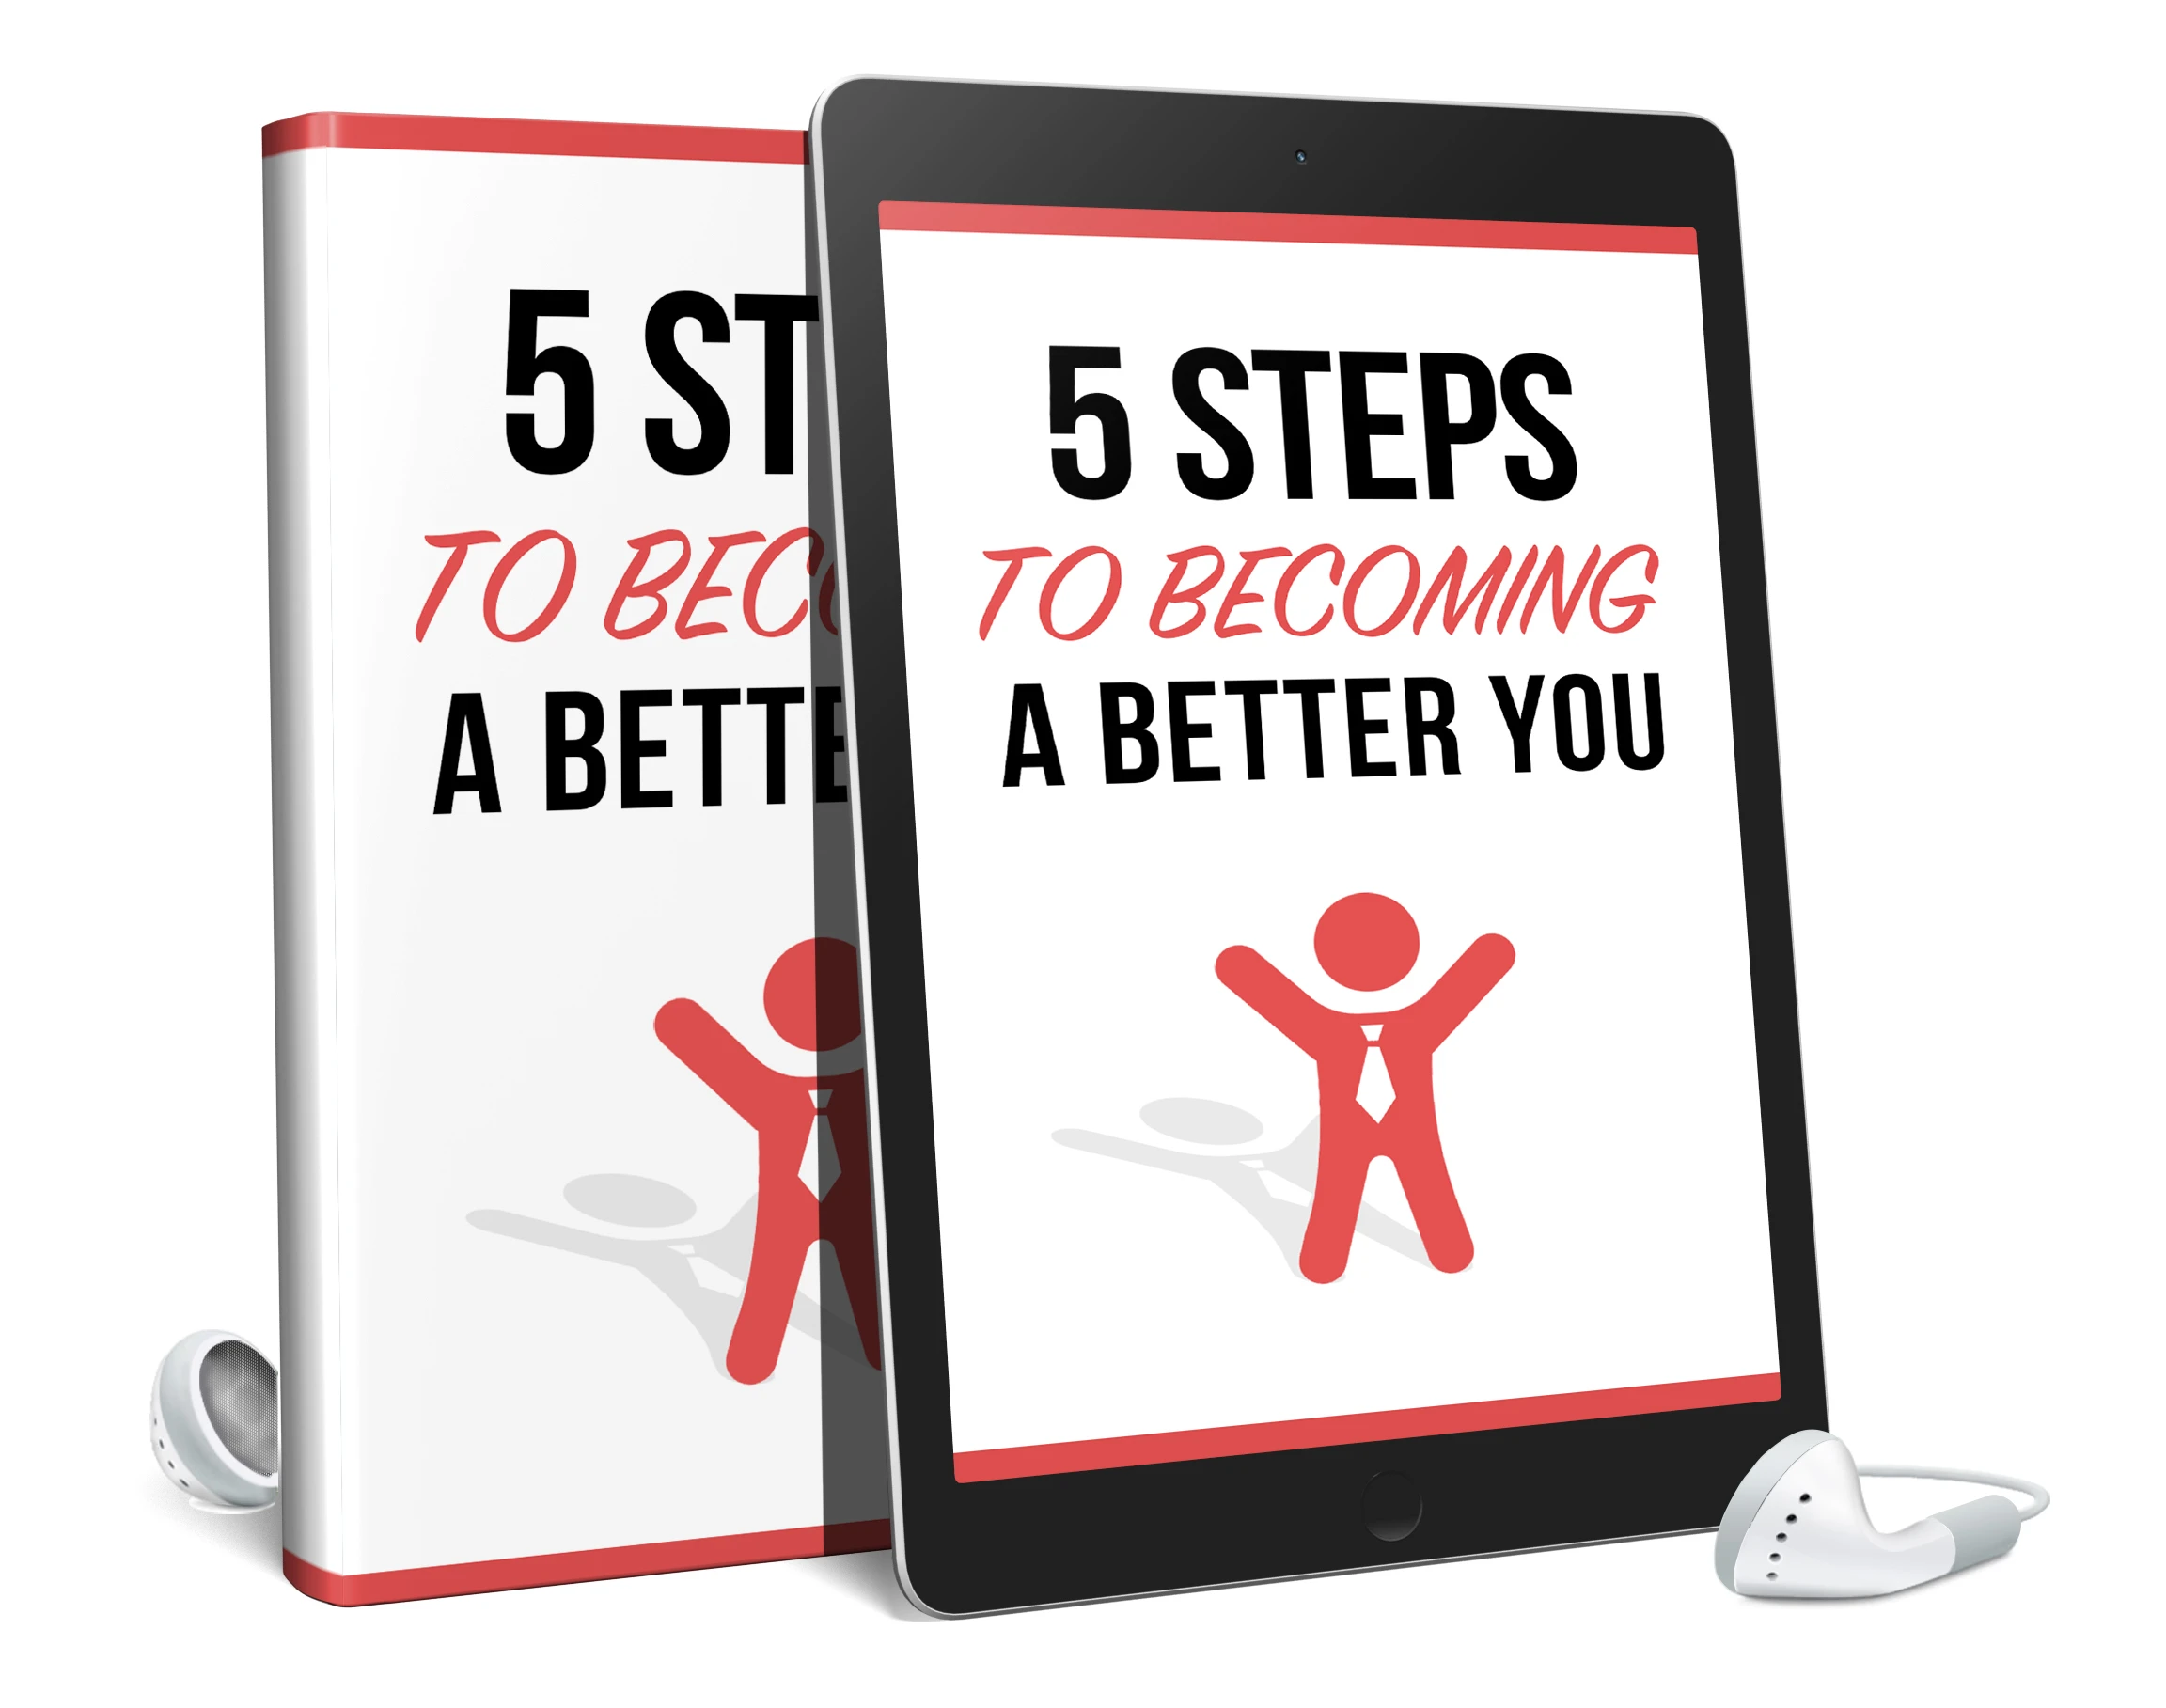 212-5-steps-to-become-a-better-you-audio-and-ebook-17059694364388.jpg